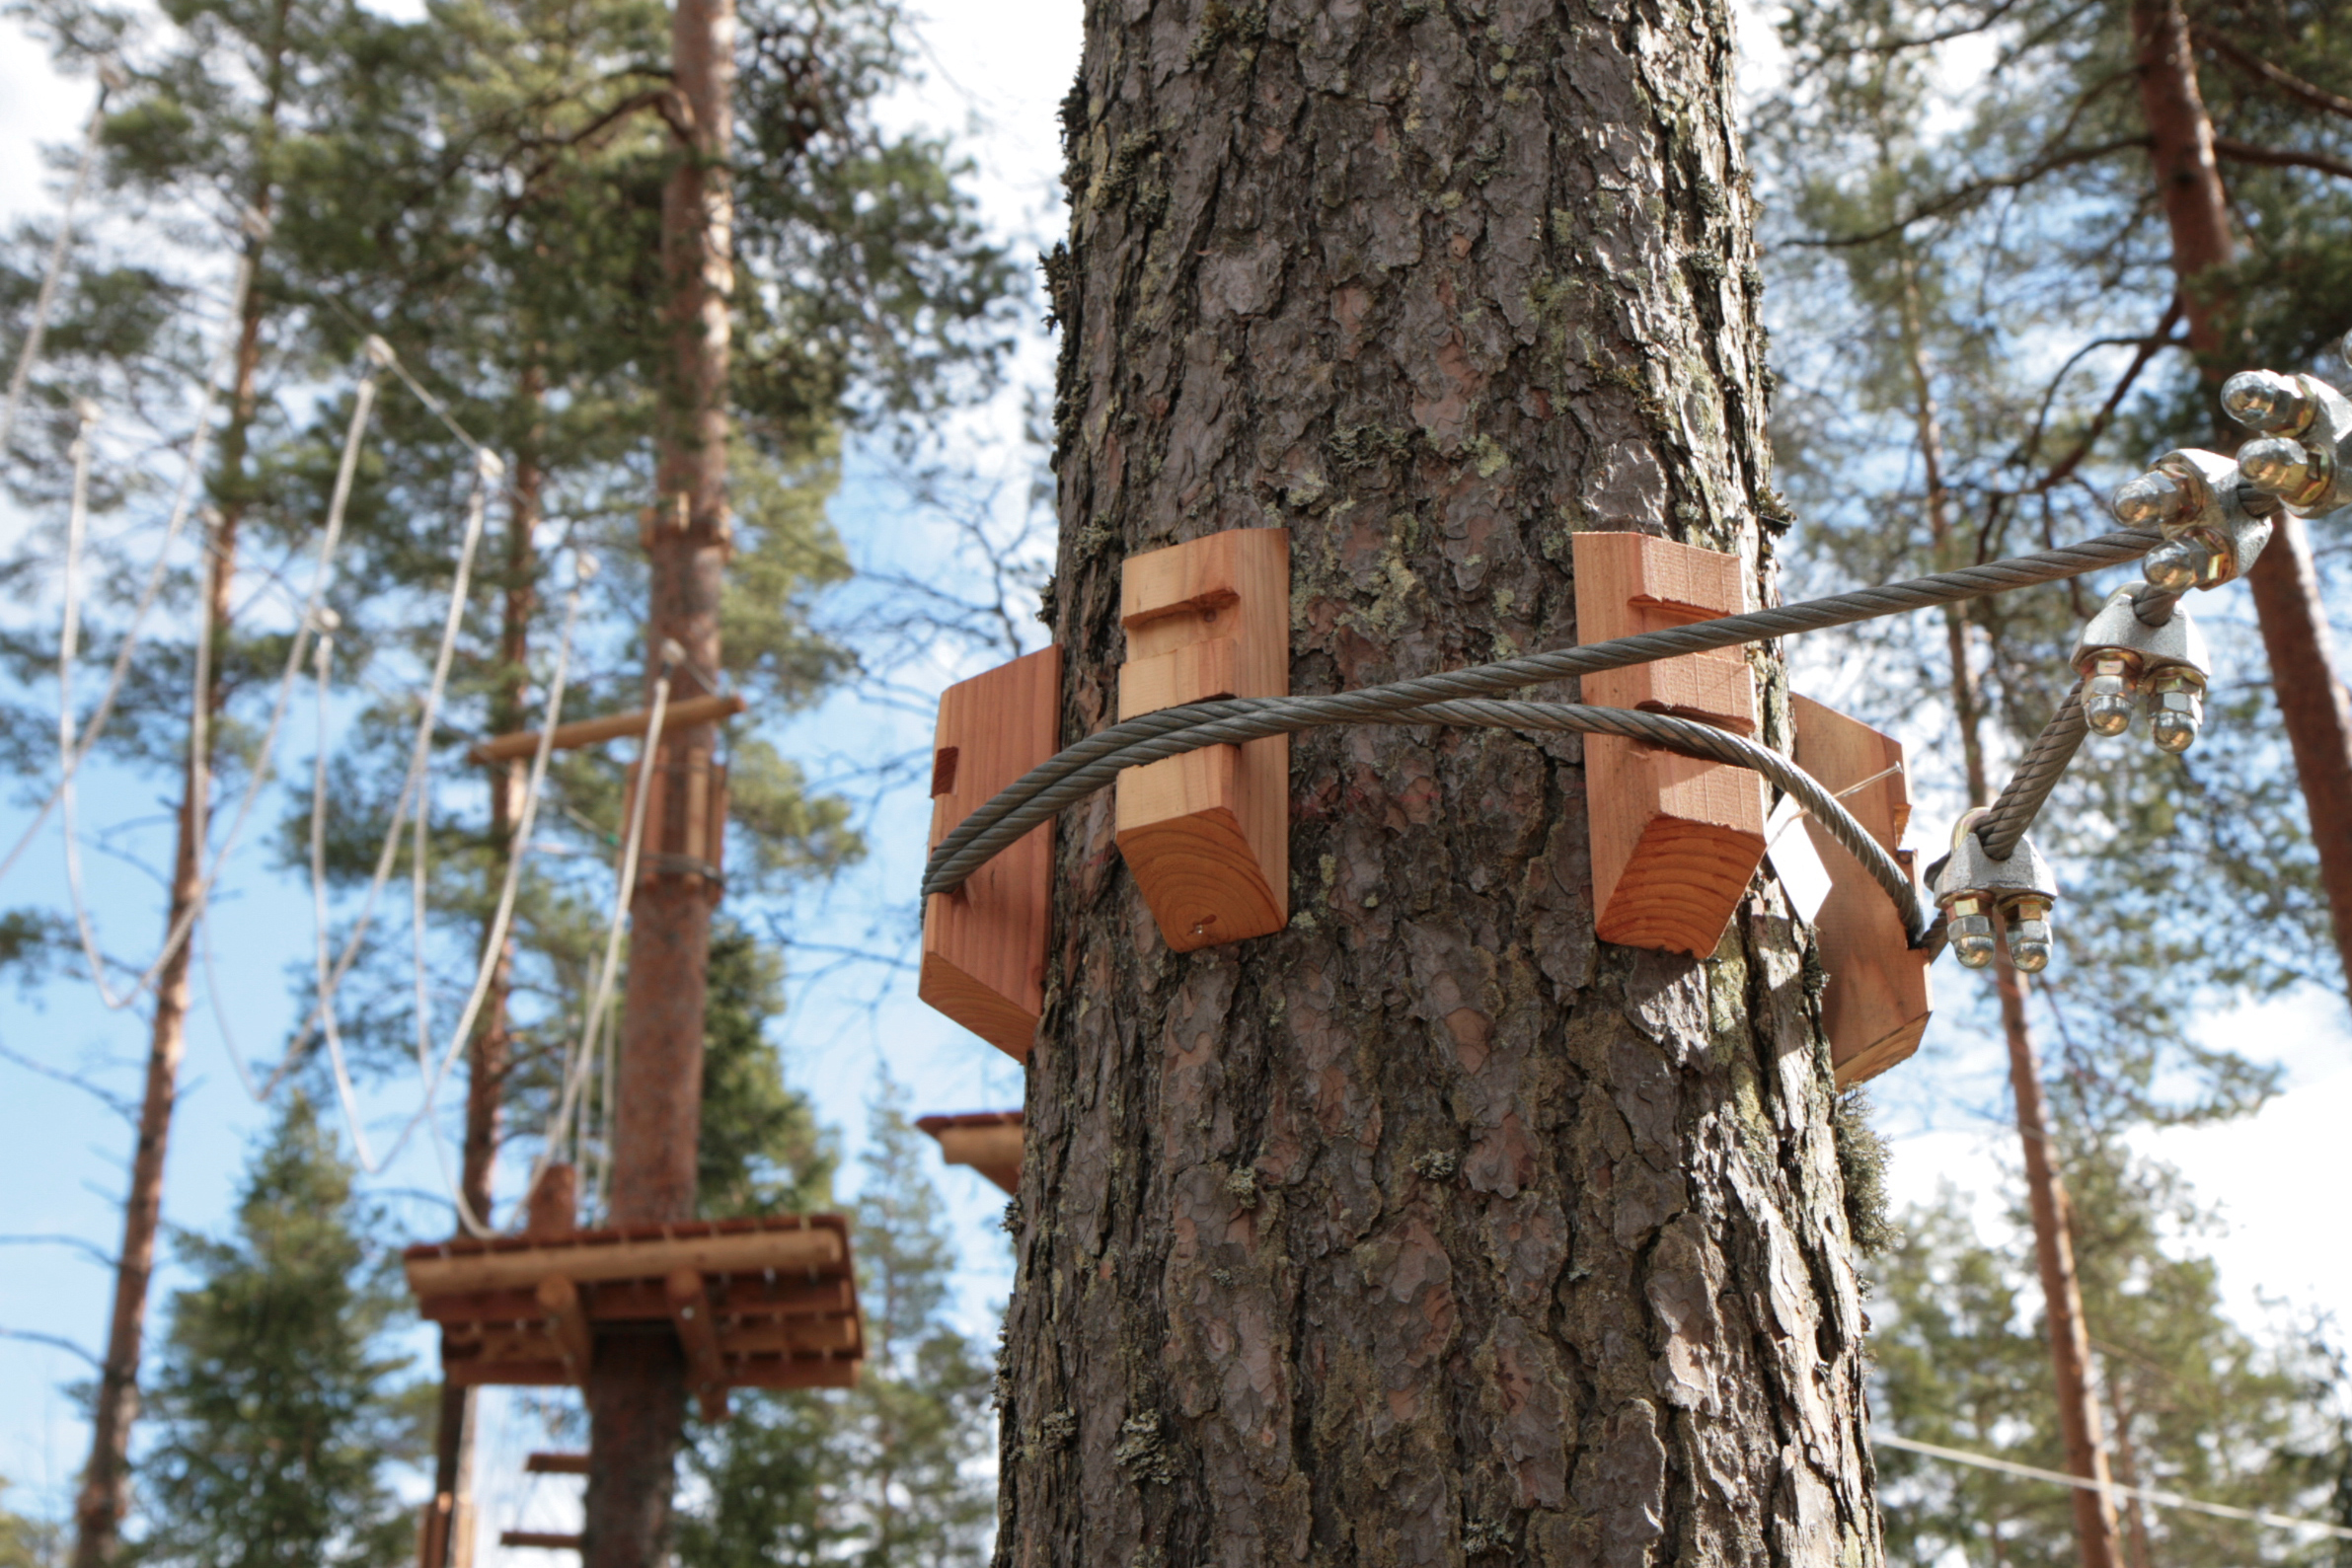 The adventure park courses are designed so as not to prevent tree growth. Photo: Anna Kauppi